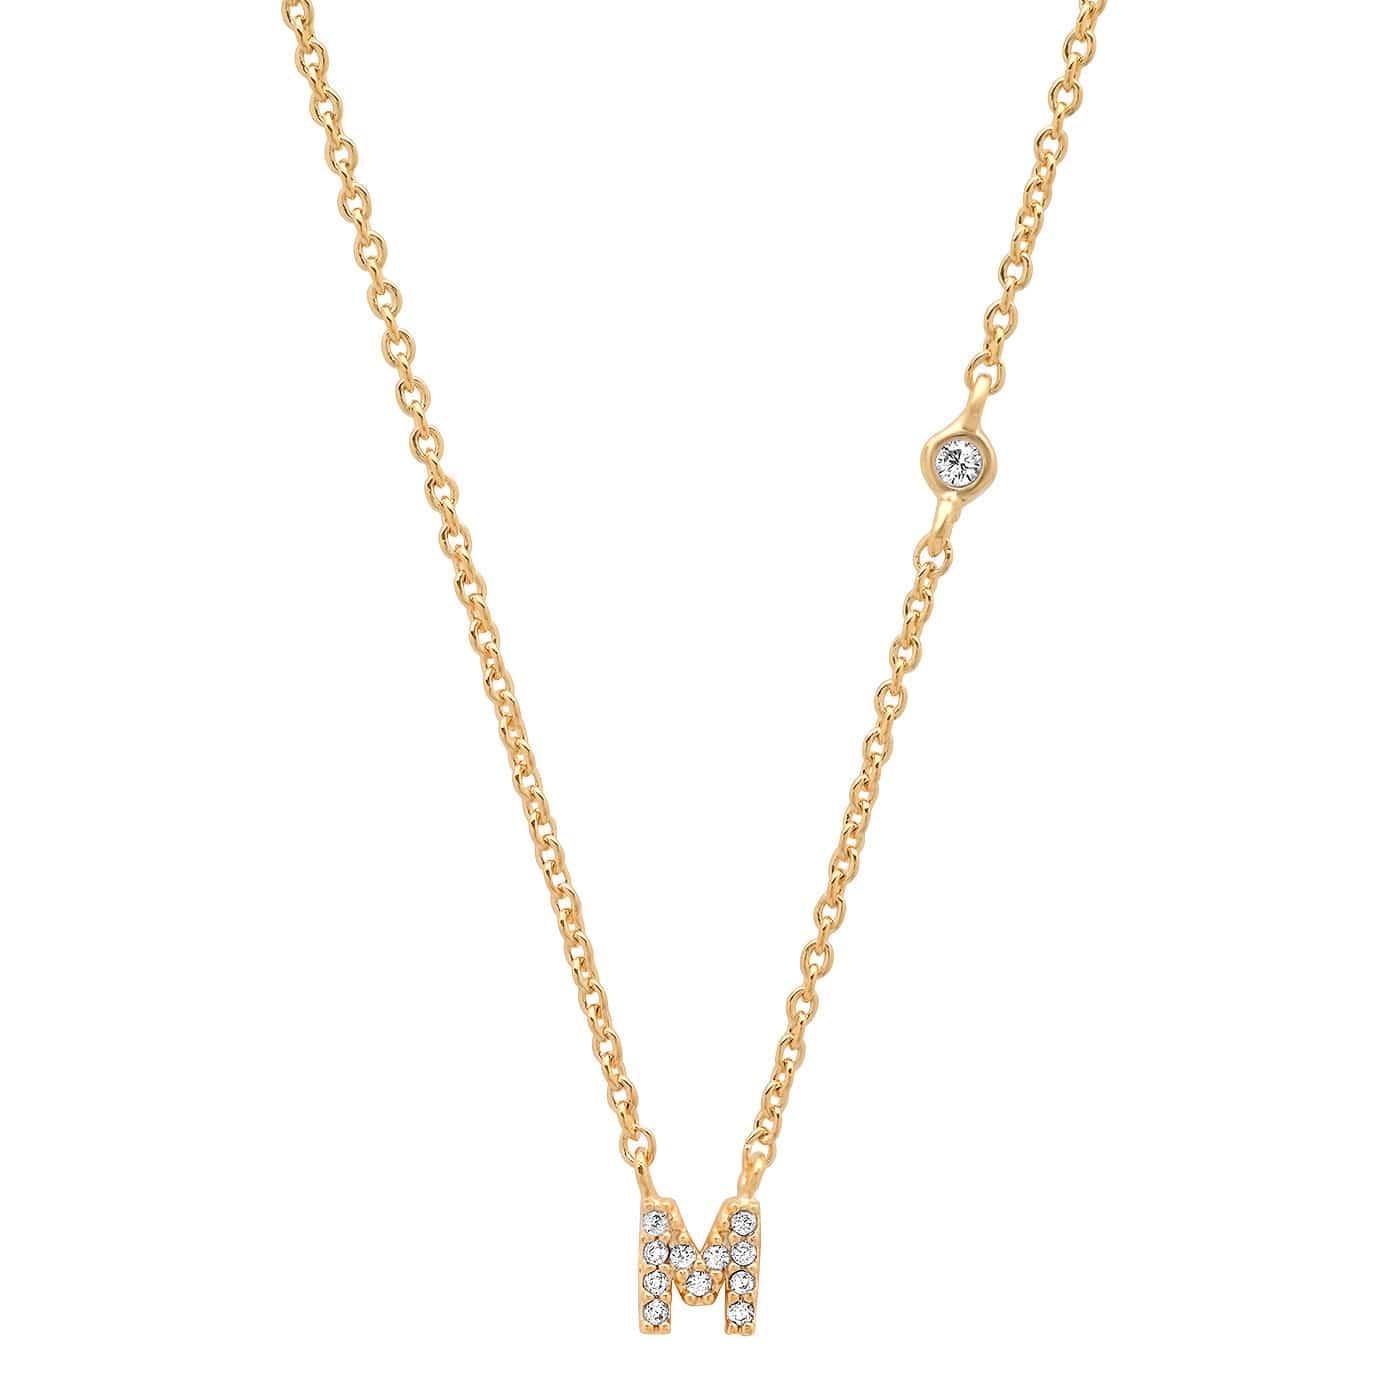 TAI JEWELRY Necklace Gold / M CZ Initial Necklace